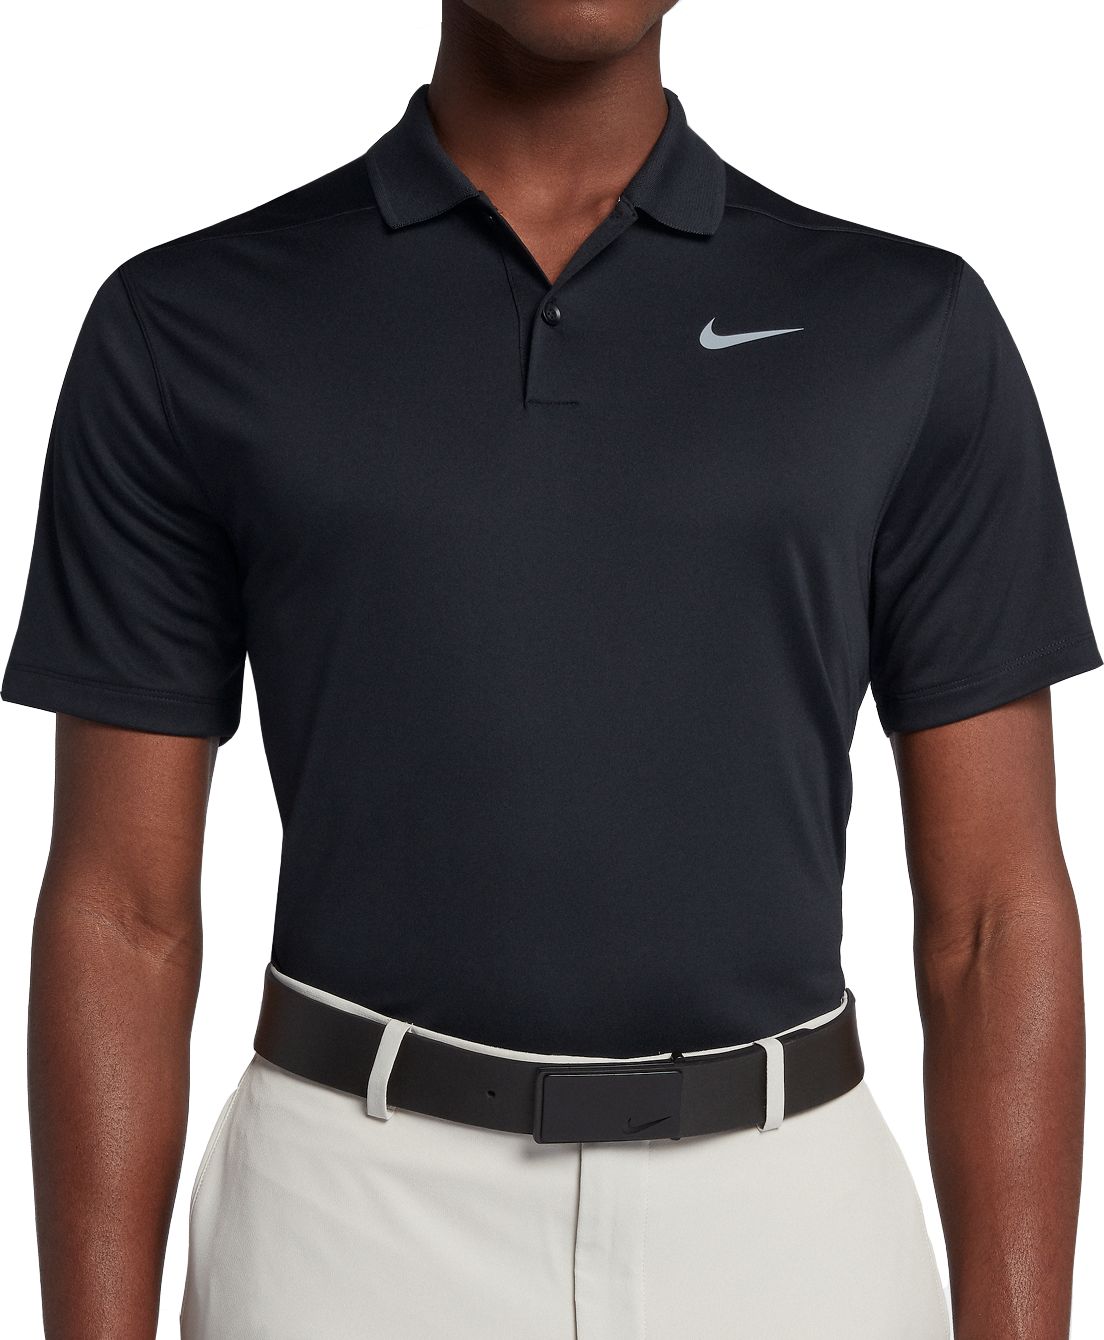 Nike Men's Solid Dry Victory Golf Polo ...